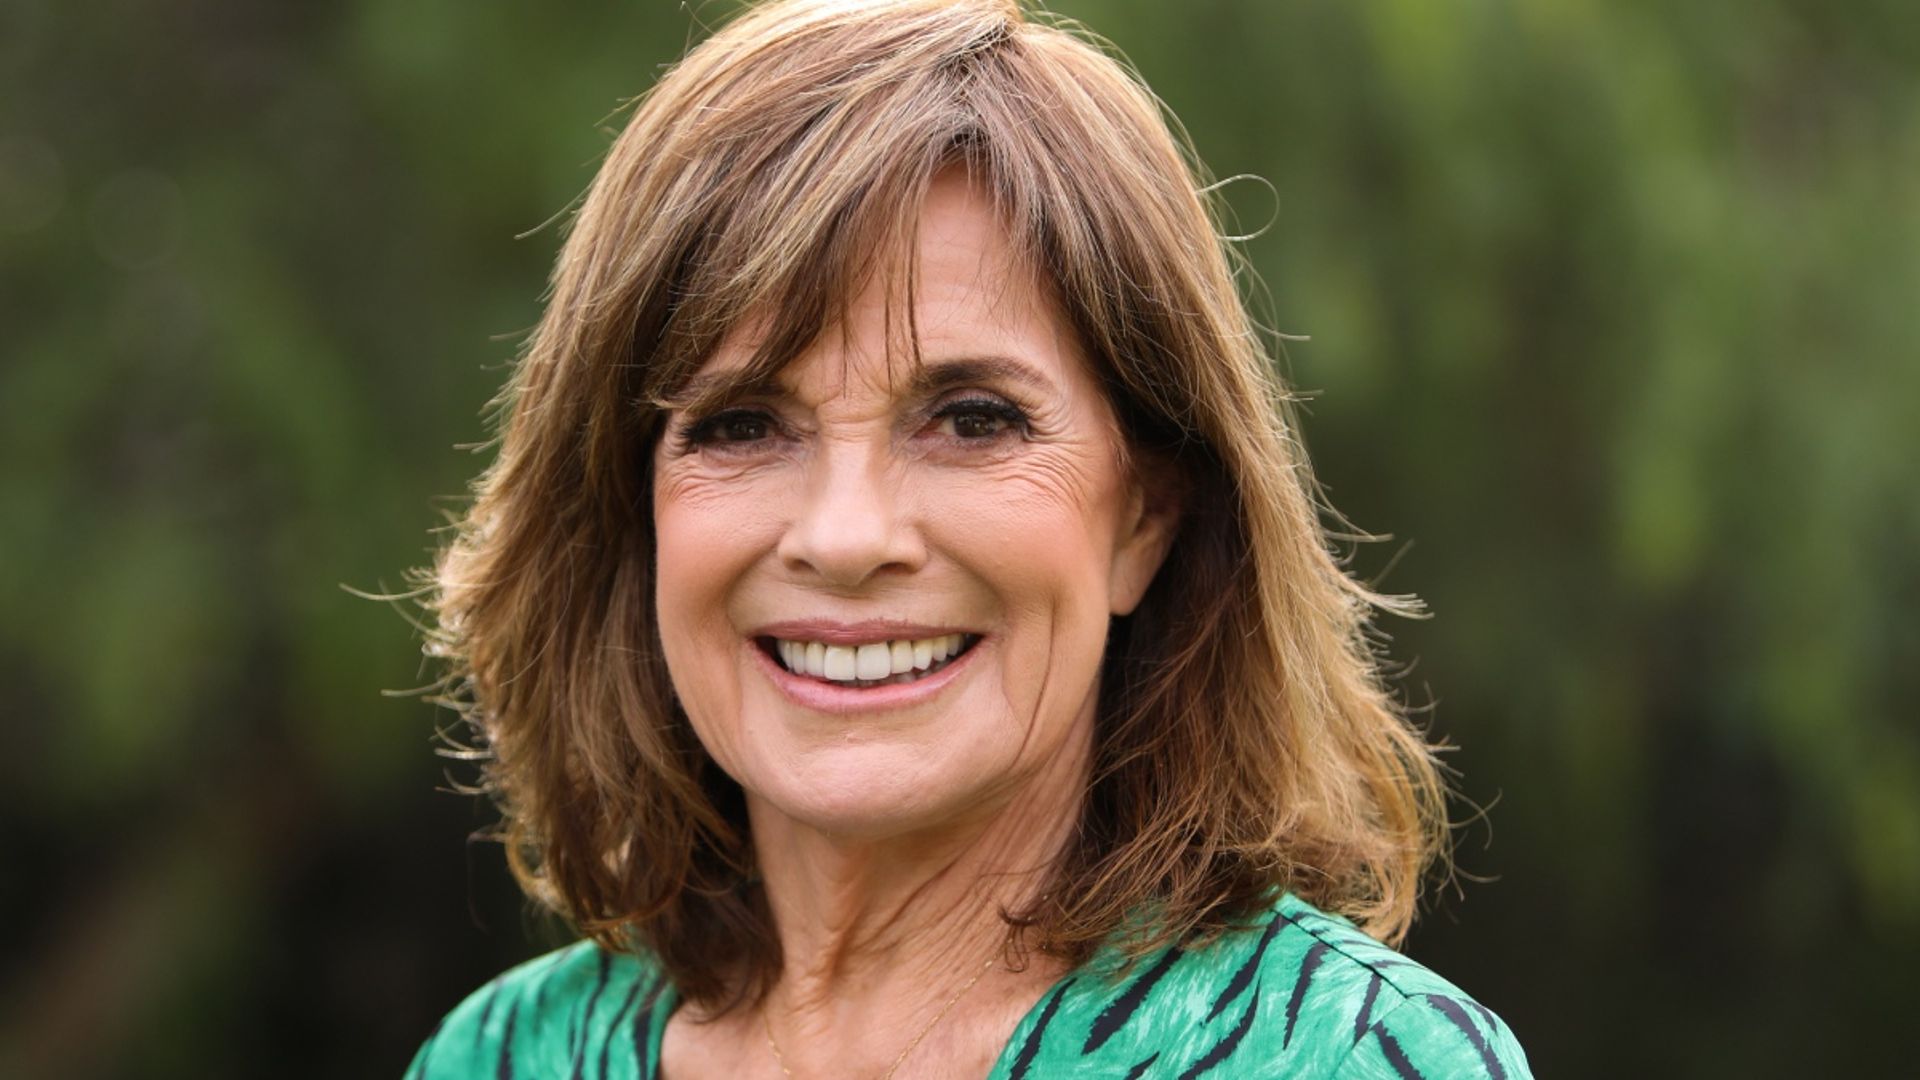 Dallas star Linda Gray reveals 'chauvinistic' working culture on set